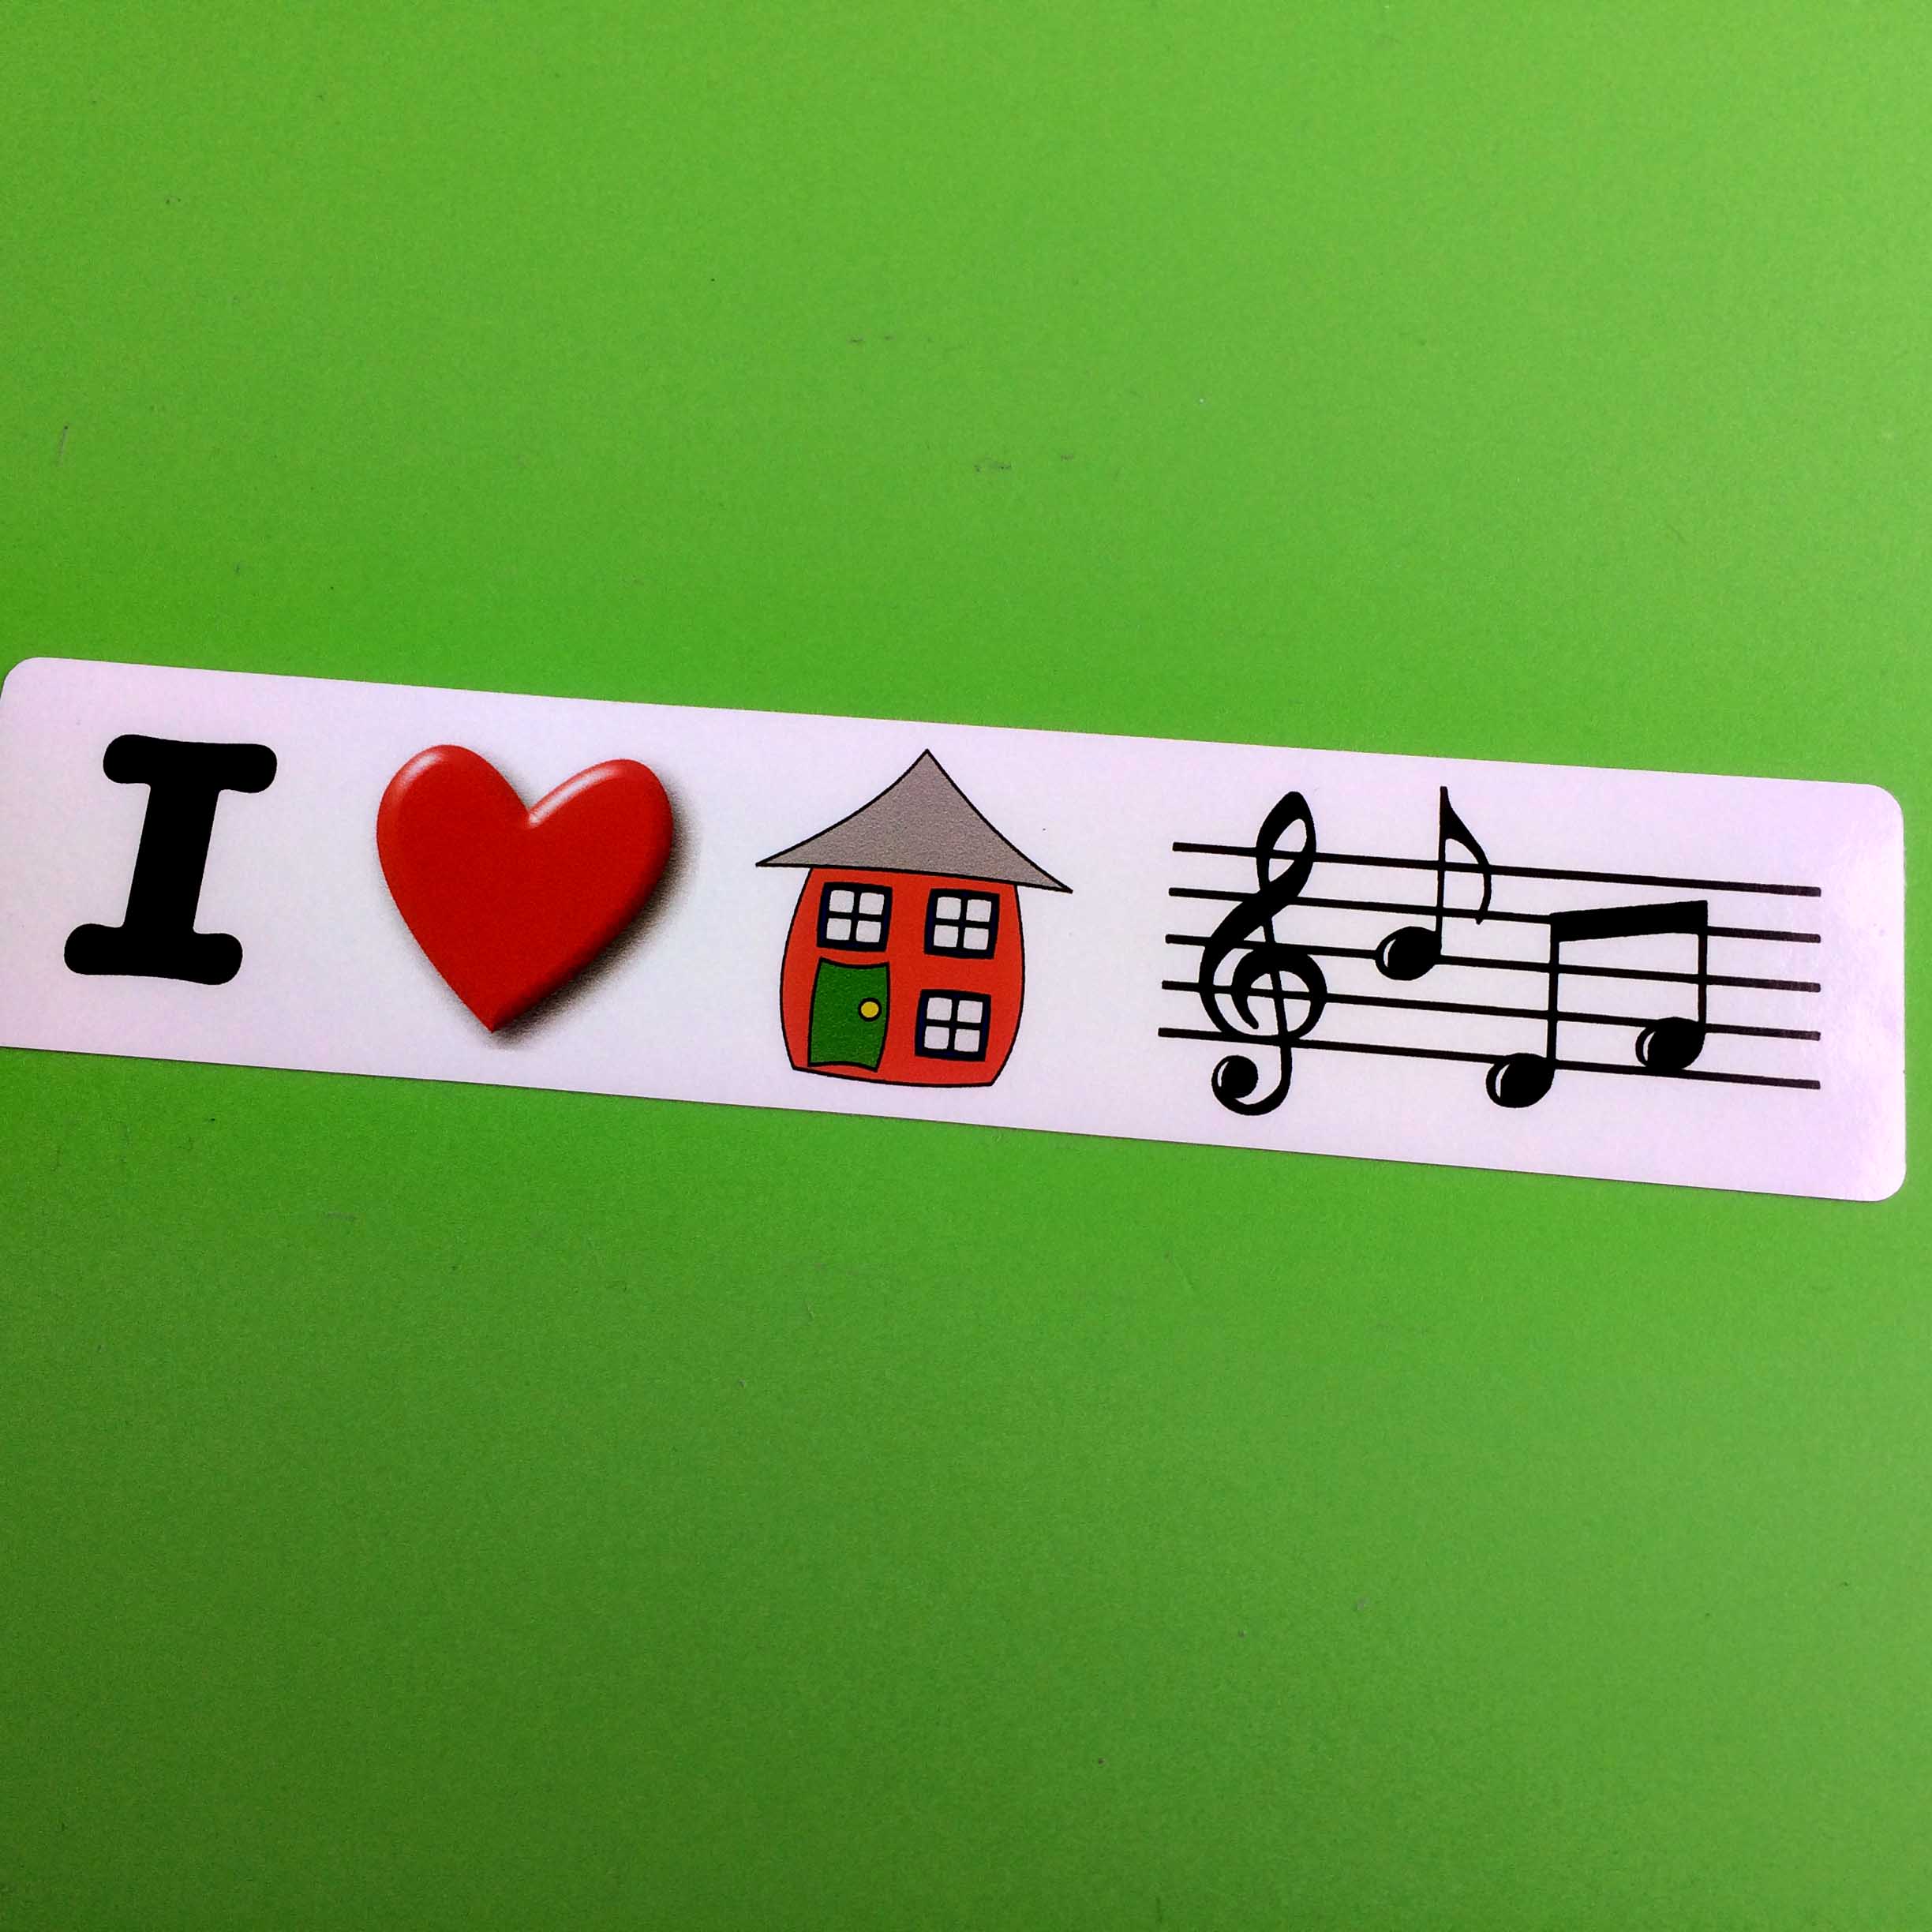 I LOVE HOUSE MUSIC STICKER. The letter I in black, a red love heart, a red house with a green door and three windows and musical notes sit in a row on a white background.